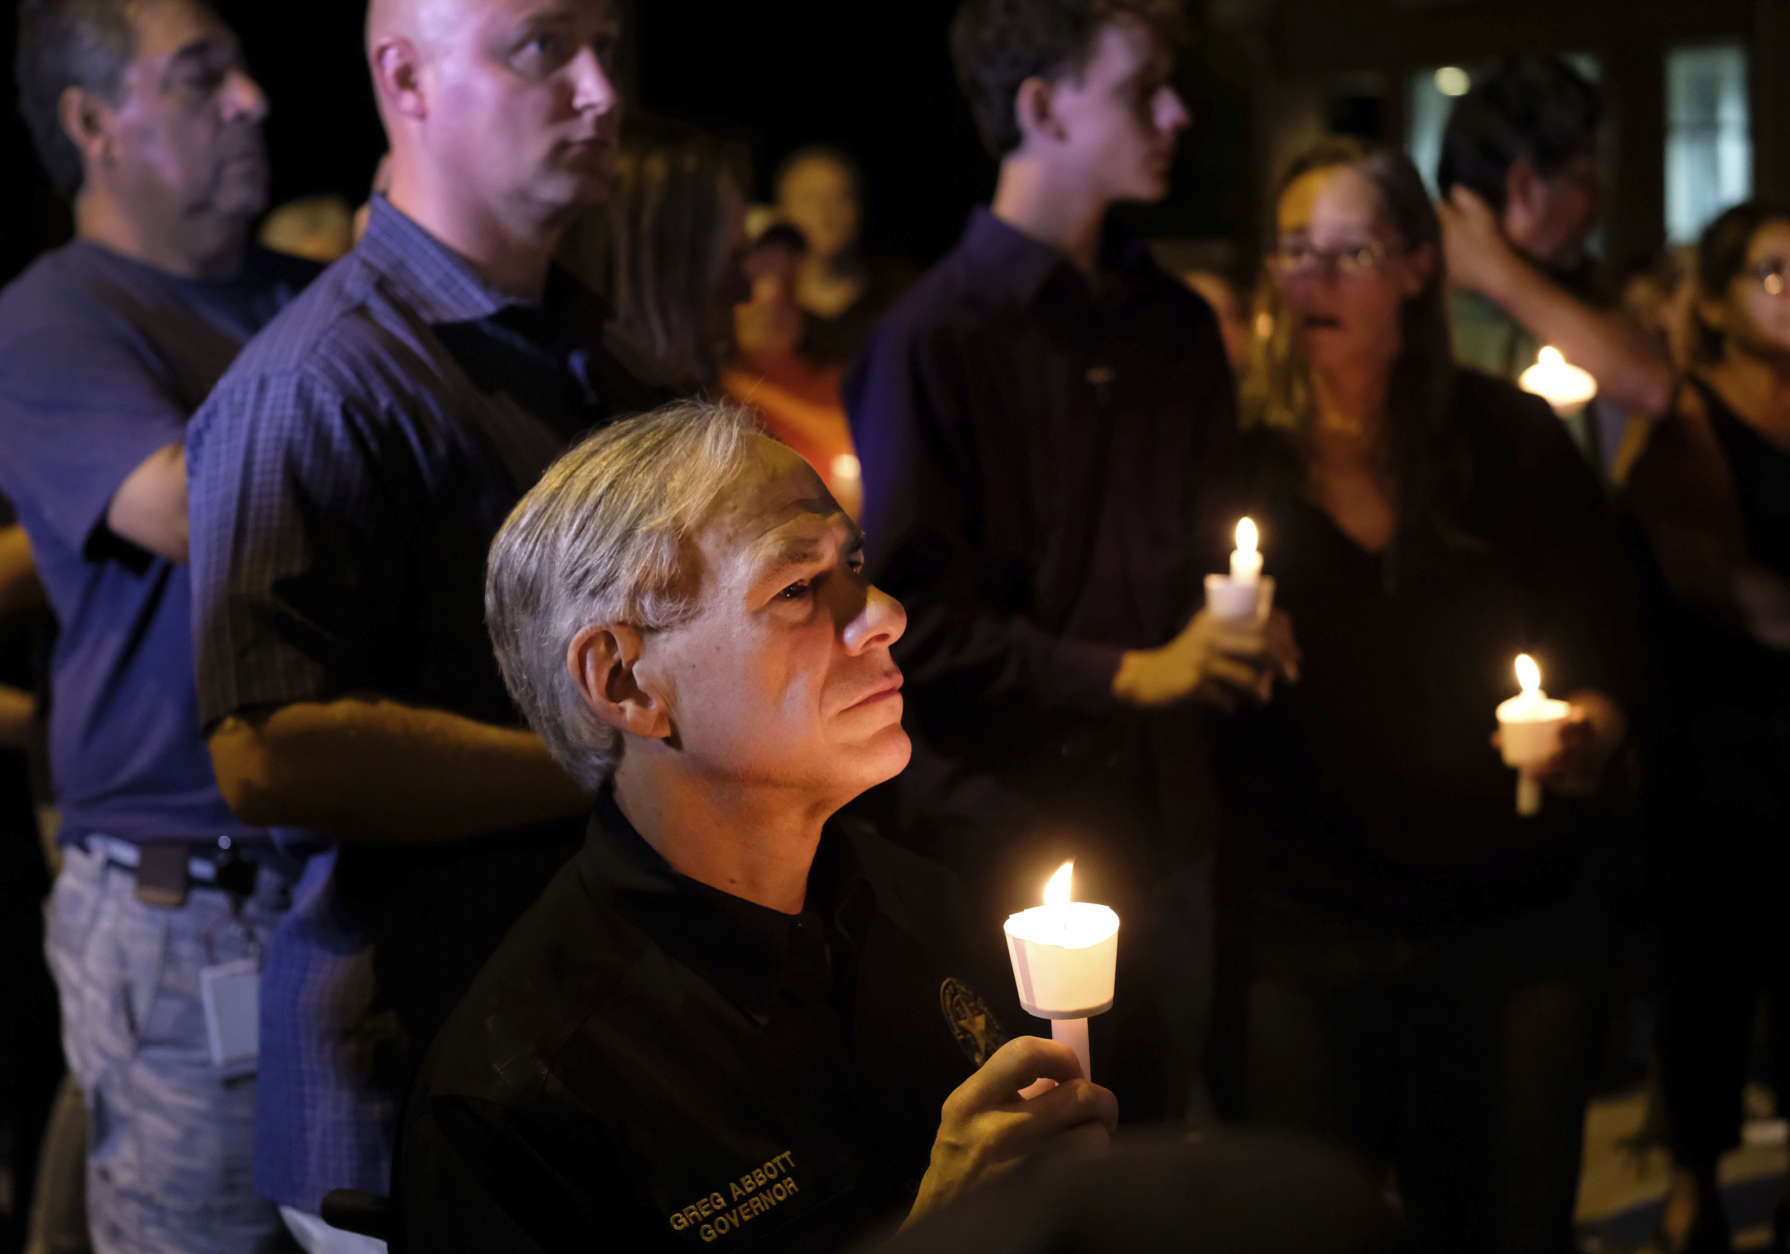 Texas Gov. Greg Abbott attends a candlelight vigil held for the victims of a fatal shooting at the First Baptist Church of Sutherland Springs, Sunday, Nov. 5, 2017, in Sutherland Springs, Texas. (AP Photo/Laura Skelding)